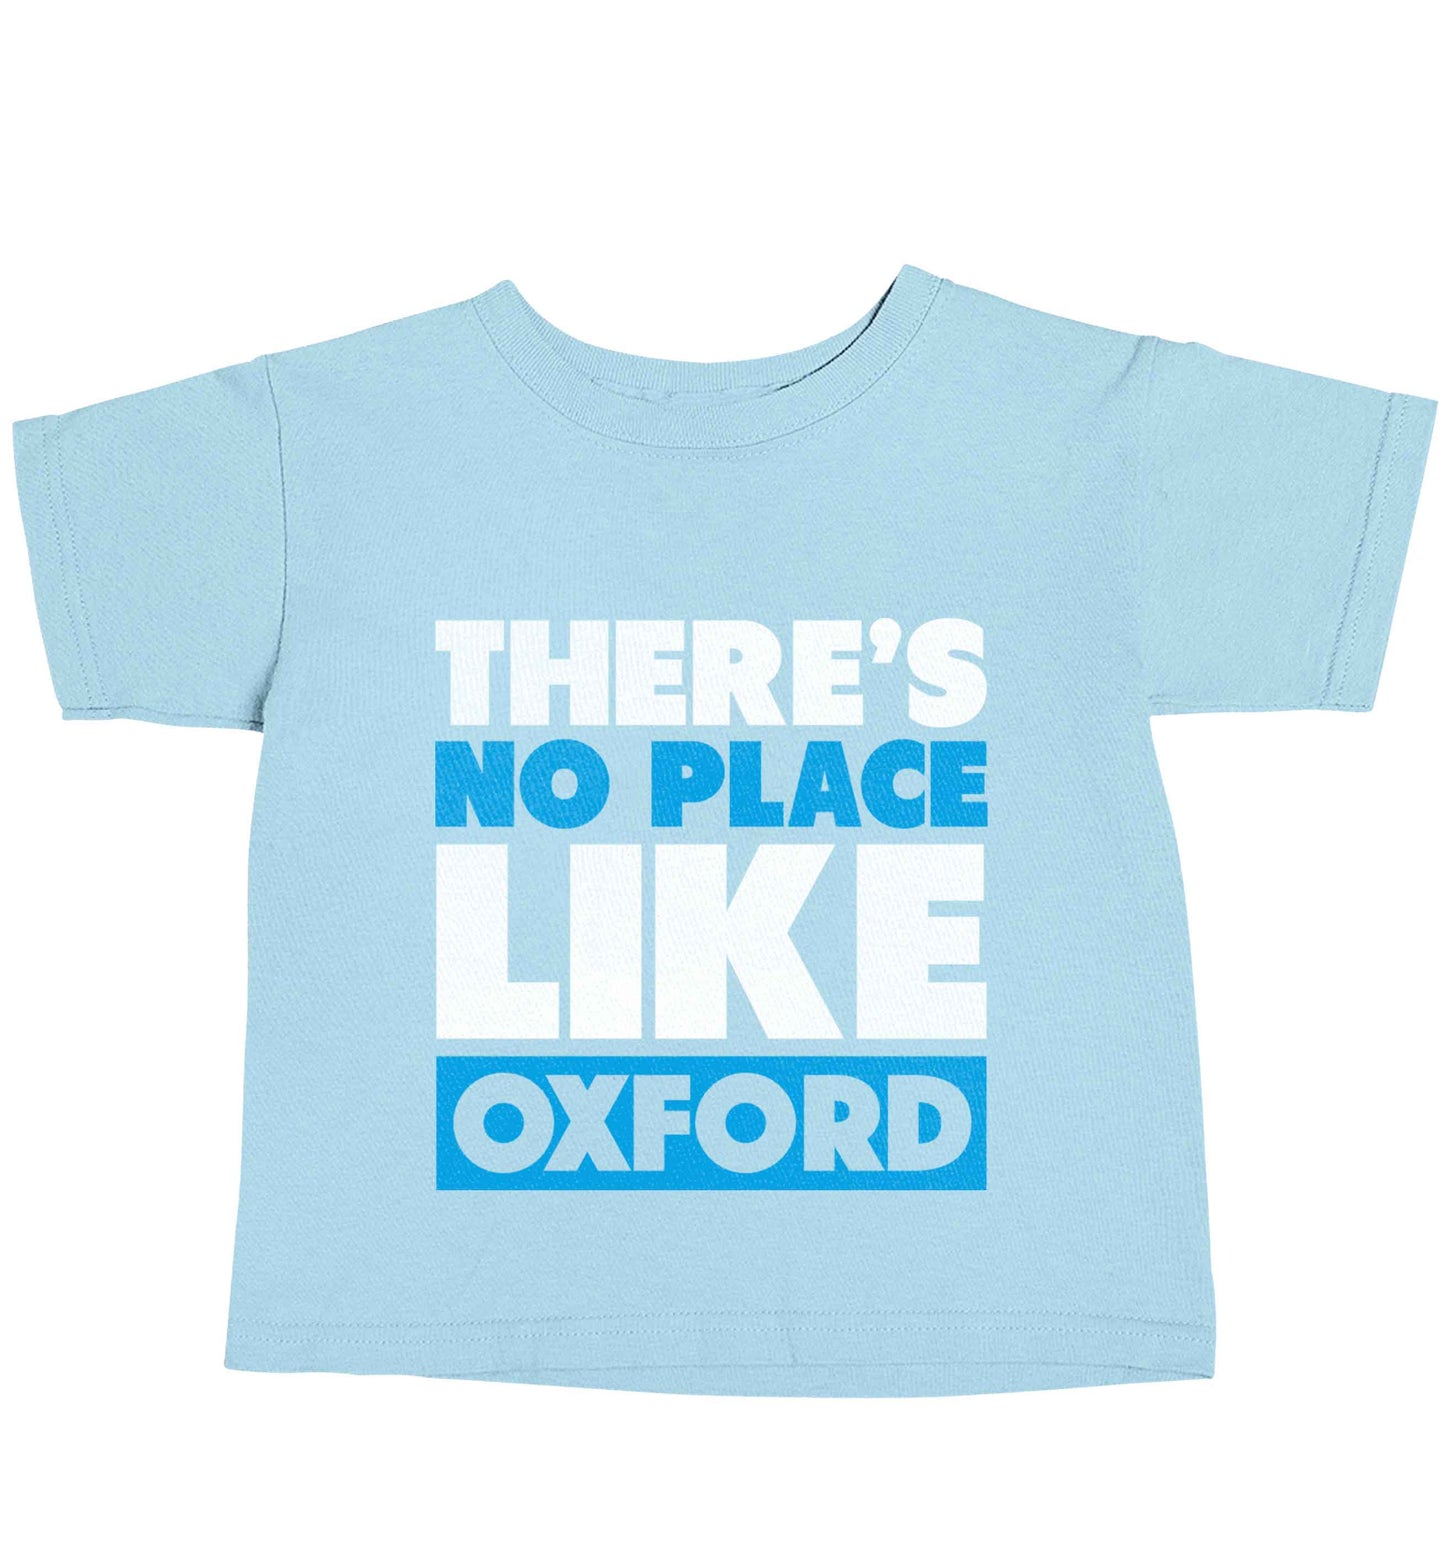 There's no place like Oxford light blue baby toddler Tshirt 2 Years